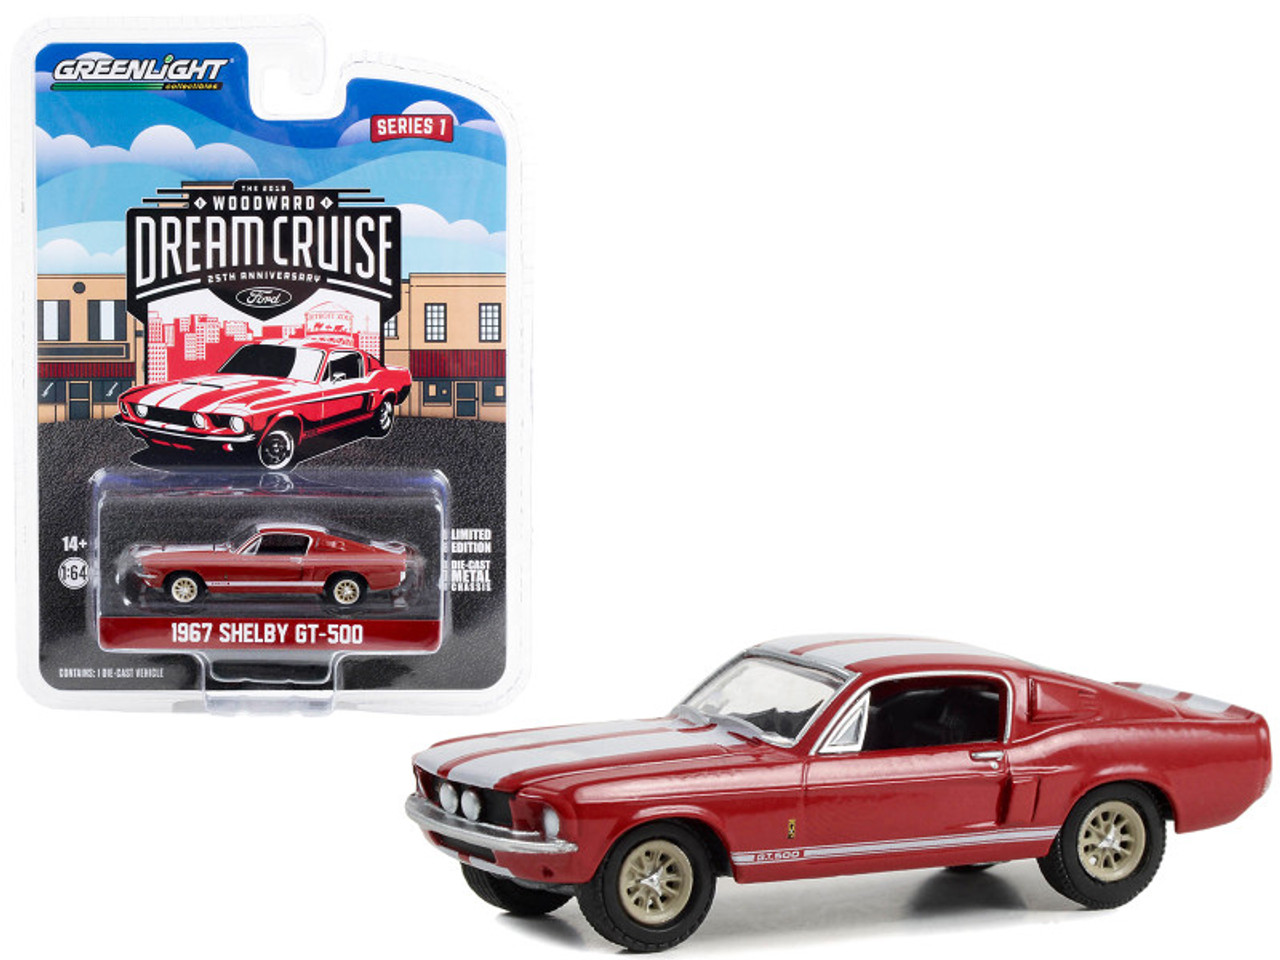 1967 Shelby GT-500 Red with White Stripes "25th Annual Woodward Dream Cruise Featured Heritage Vehicle" (2019) "Woodward Dream Cruise" Series 1 1/64 Diecast Model Car by Greenlight